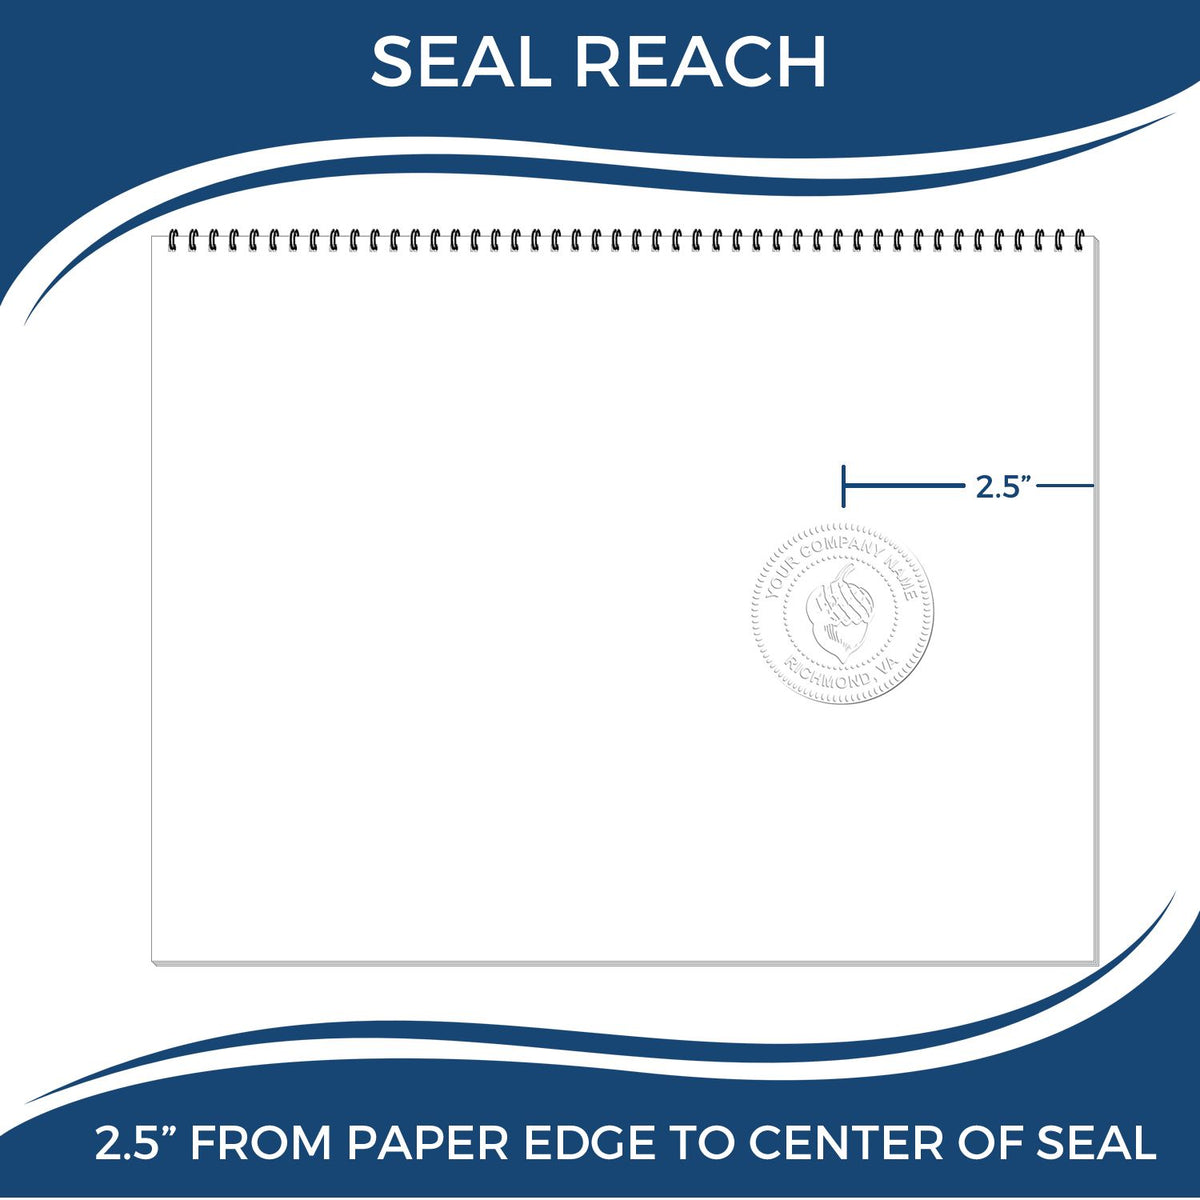 An infographic showing the seal reach which is represented by a ruler and a miniature seal image of the Long Reach North Carolina Geology Seal